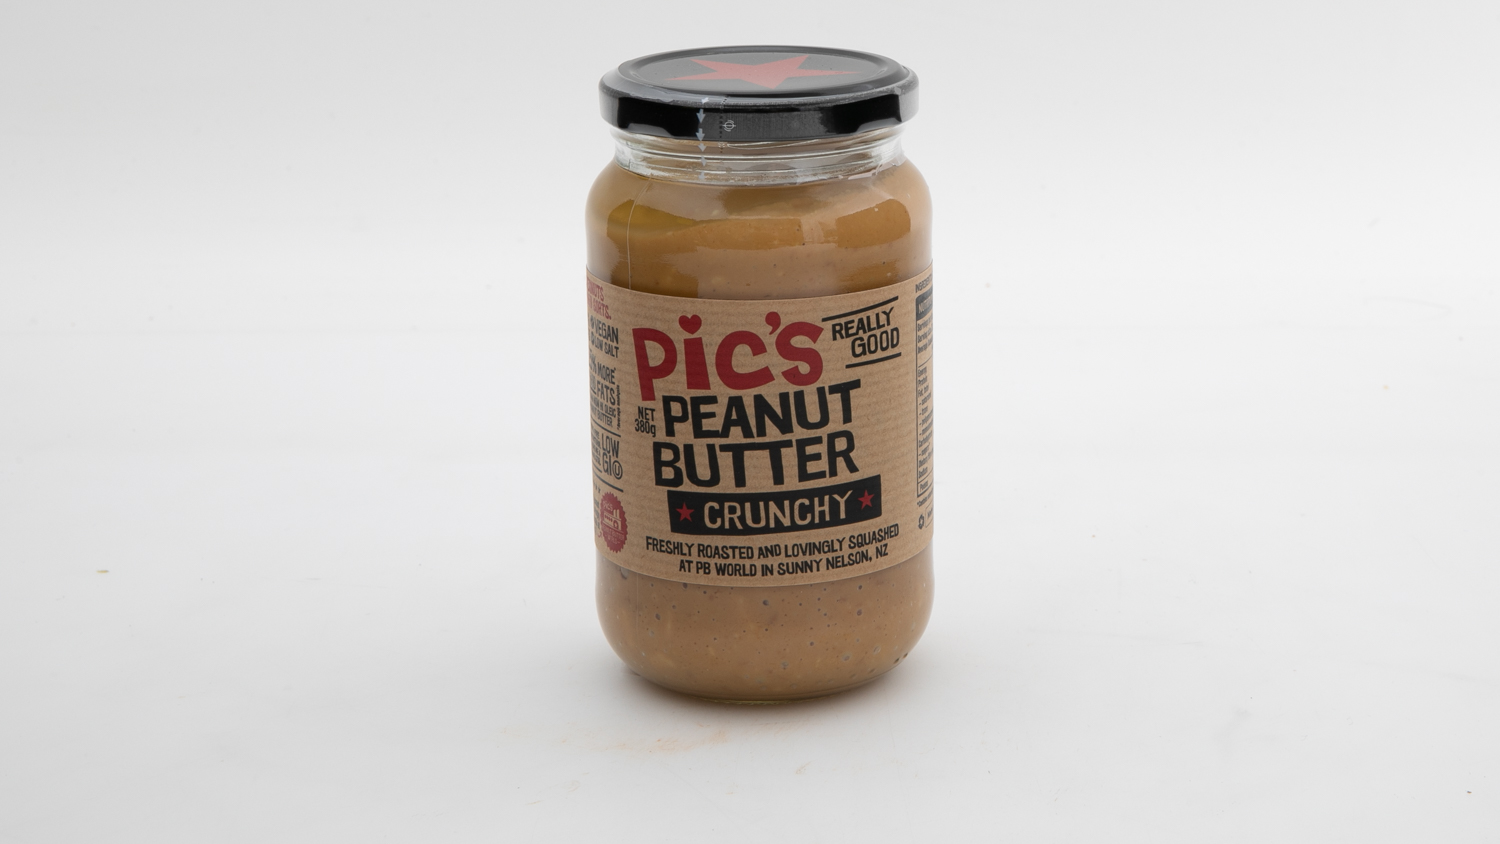 Pic's Peanut Butter Crunchy carousel image